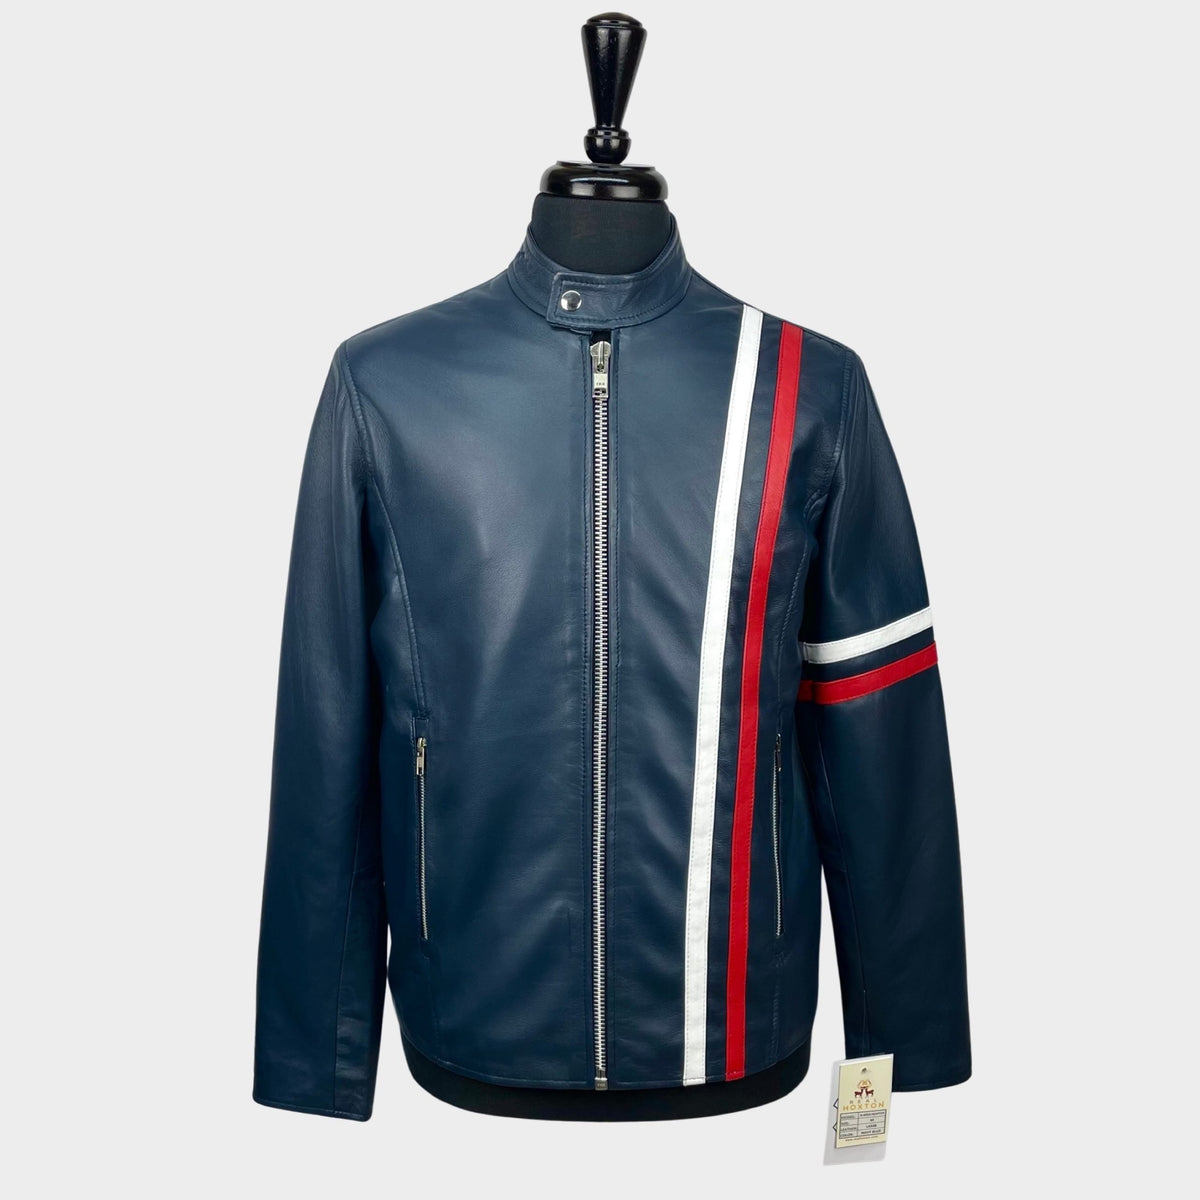 Real Hoxton Navy Cafe Racer Rally Leather Jacket